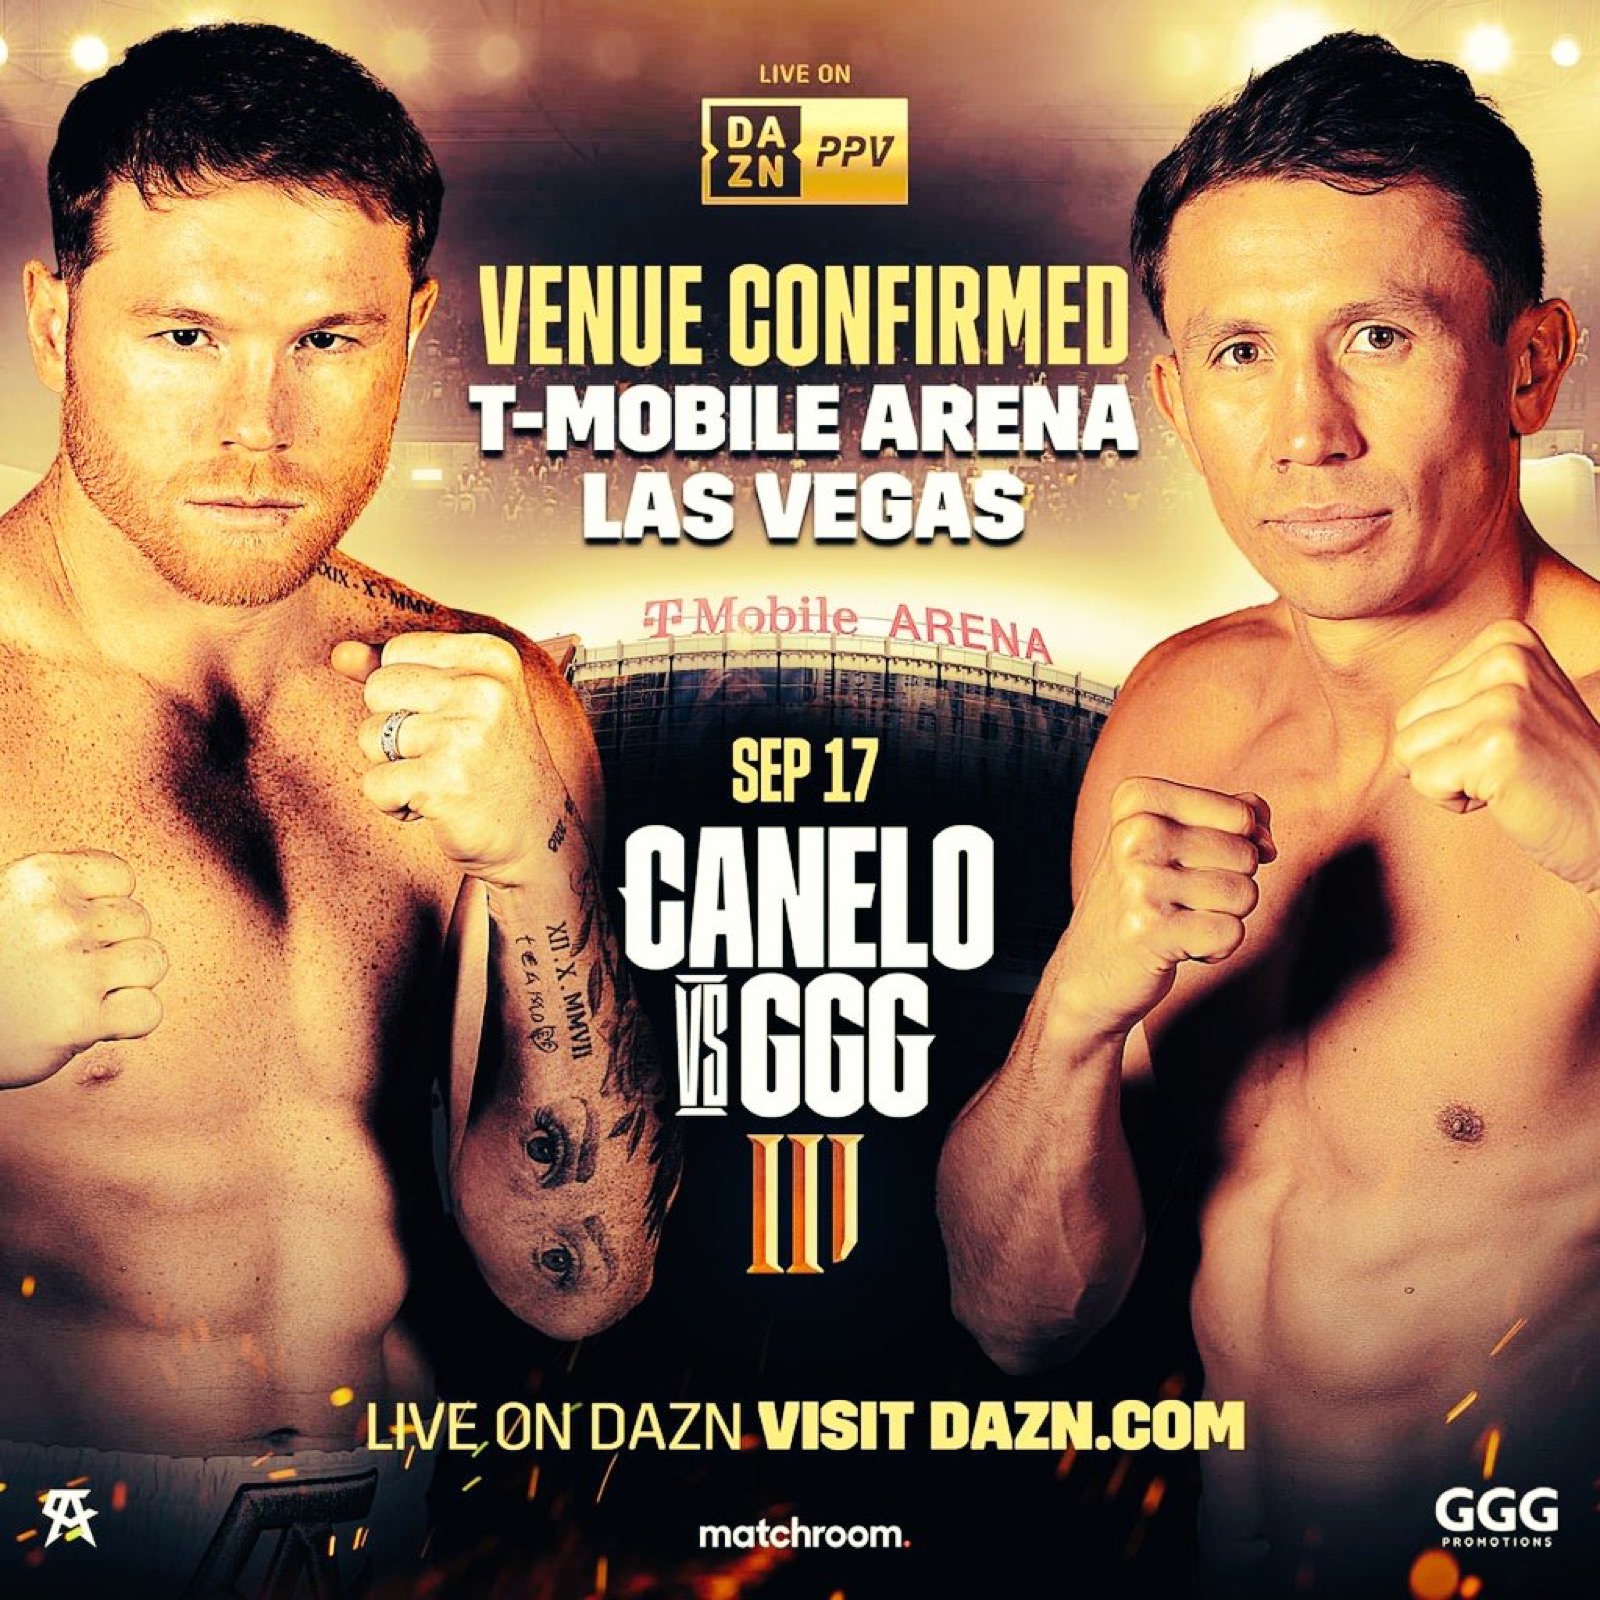 Image: Canelo vs. Golovkin III at T-Mobile Arena in Las Vegas on Sept.17th